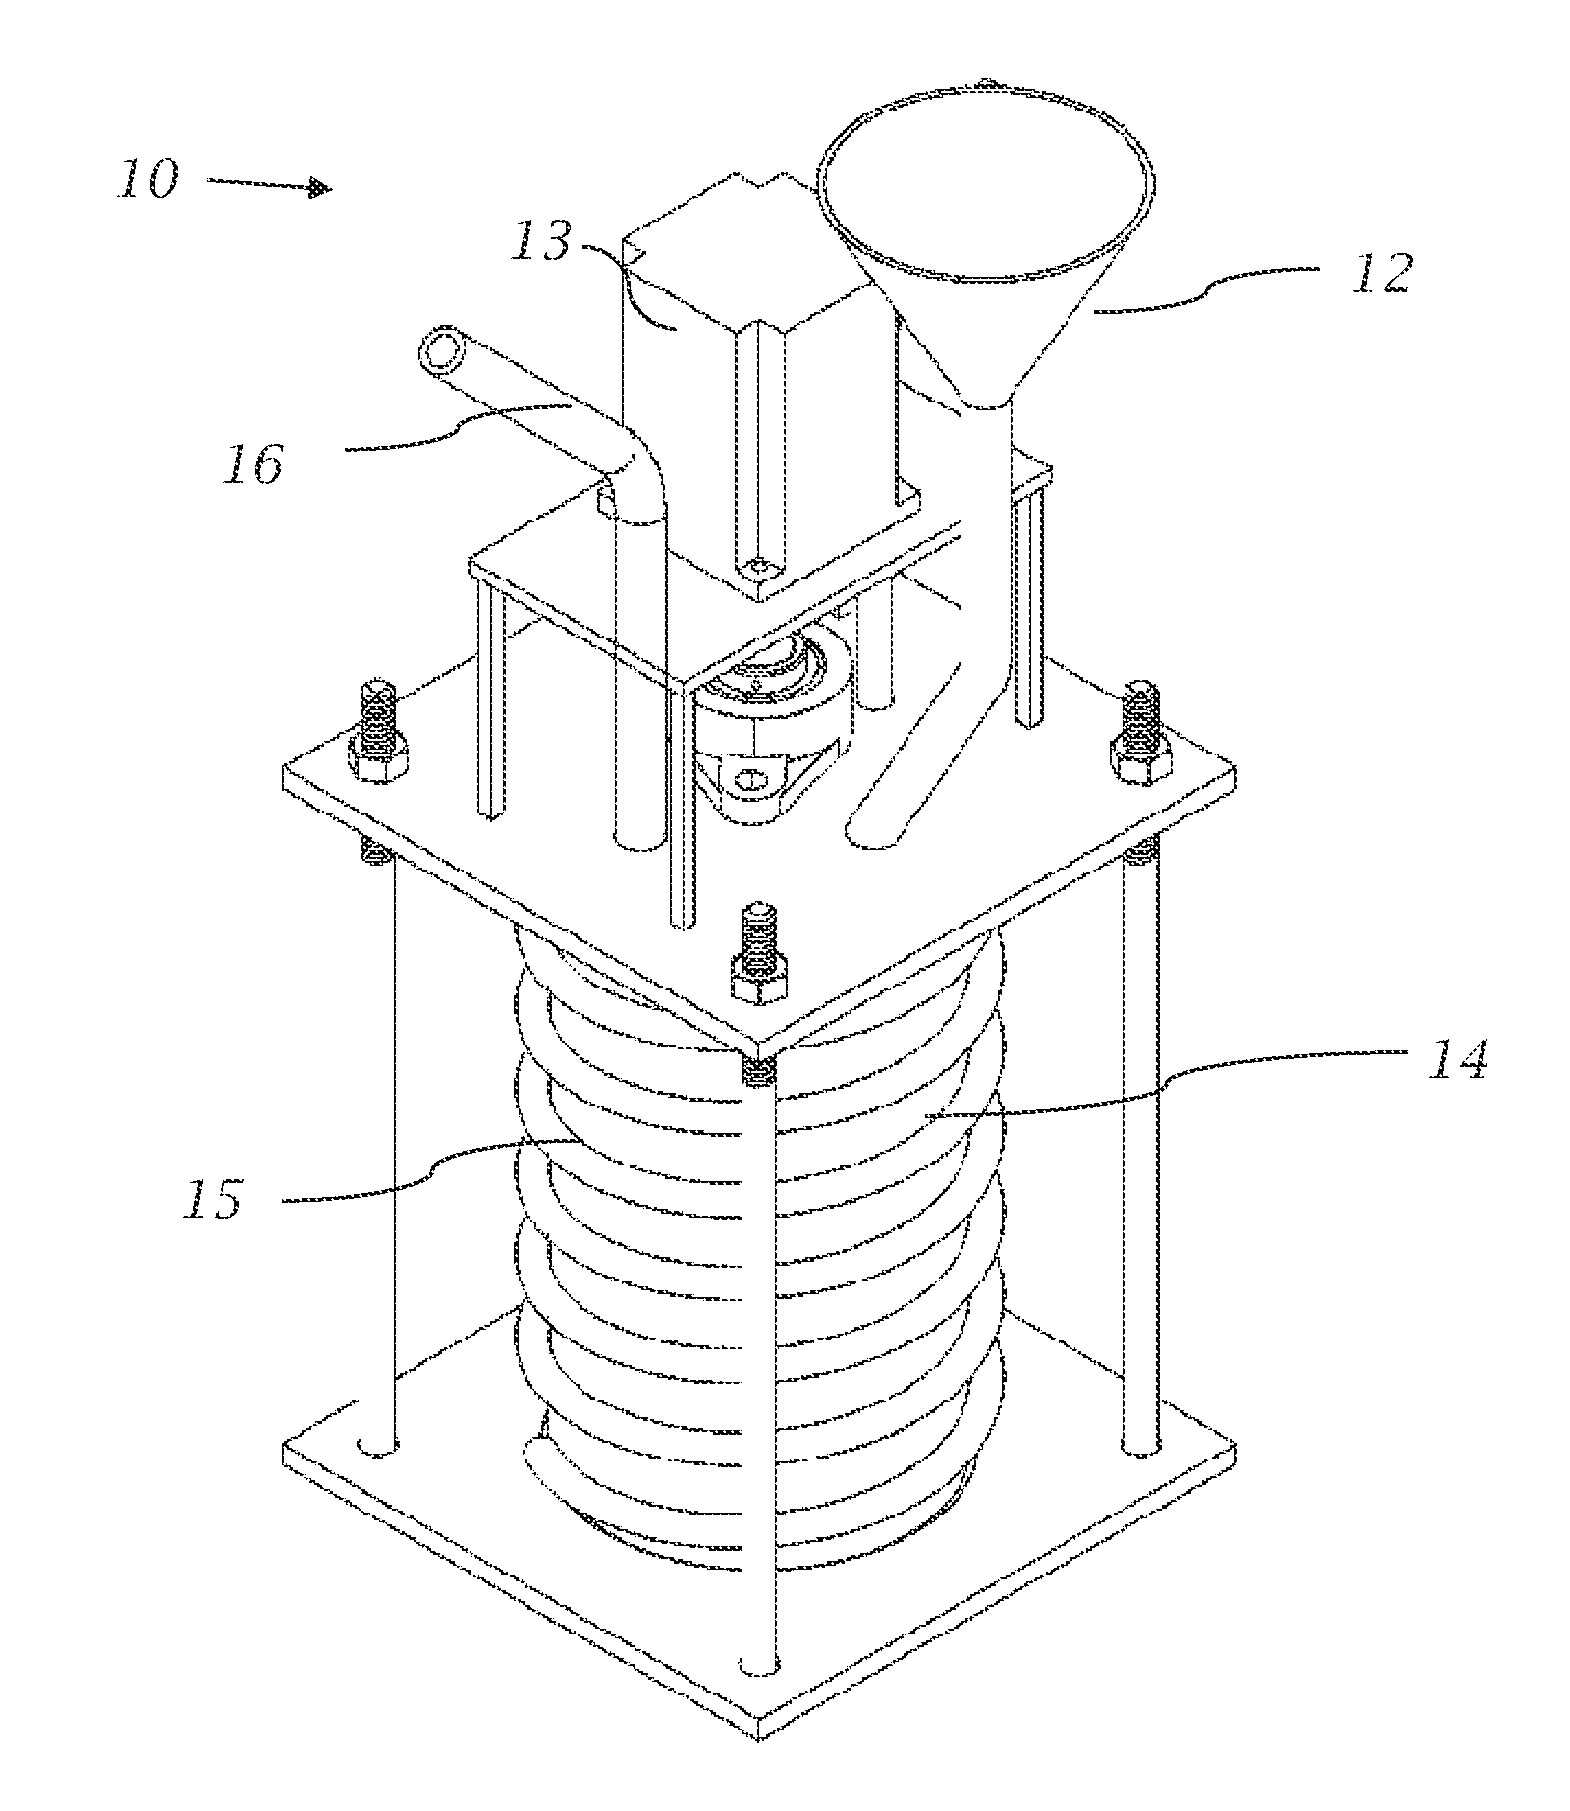 Depolymerization processes, apparatuses and catalysts for use in connection therewith